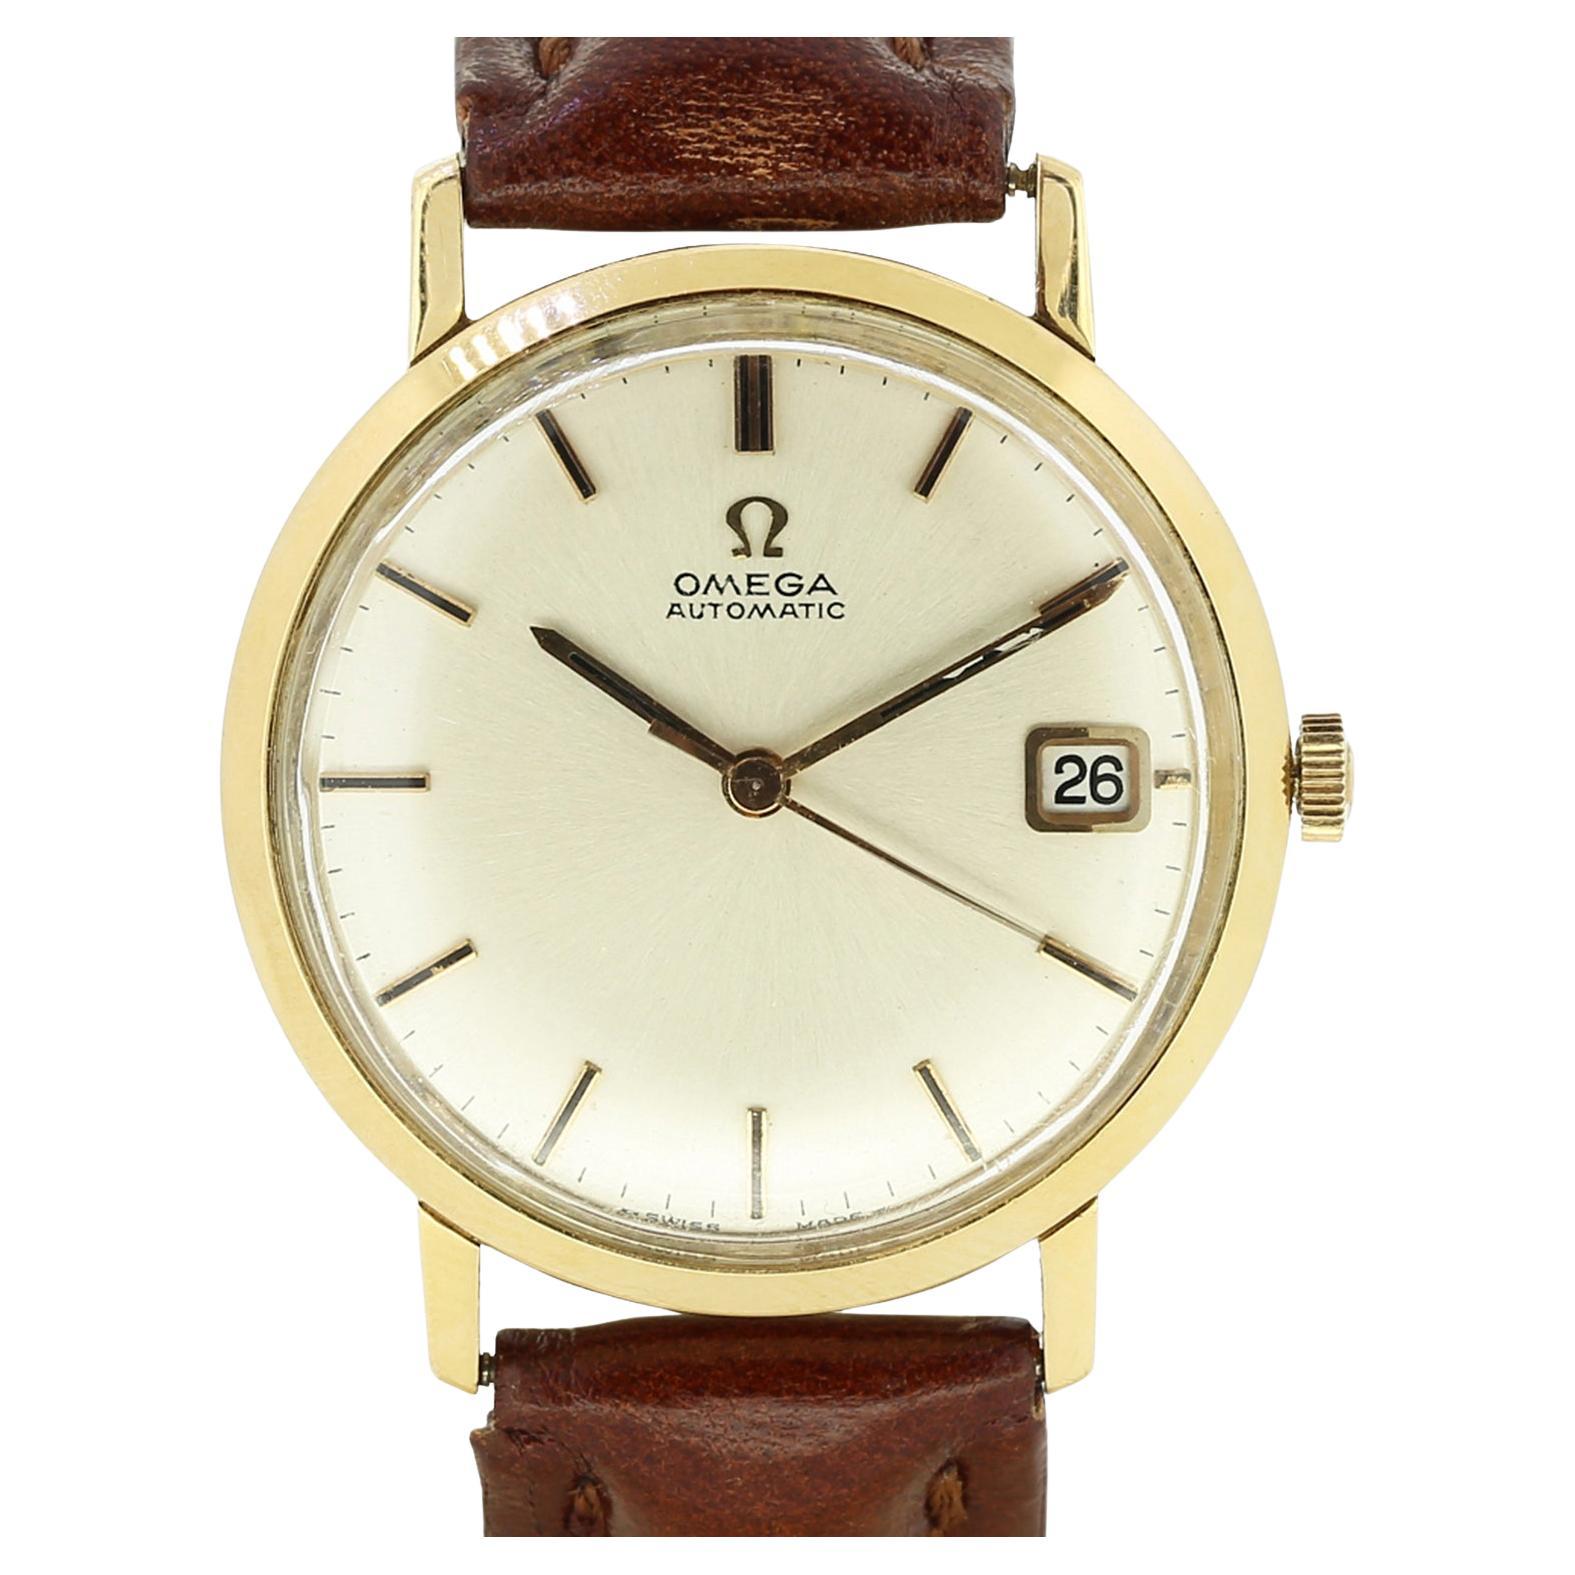 Vintage Omega Automatic Wristwatch For Sale